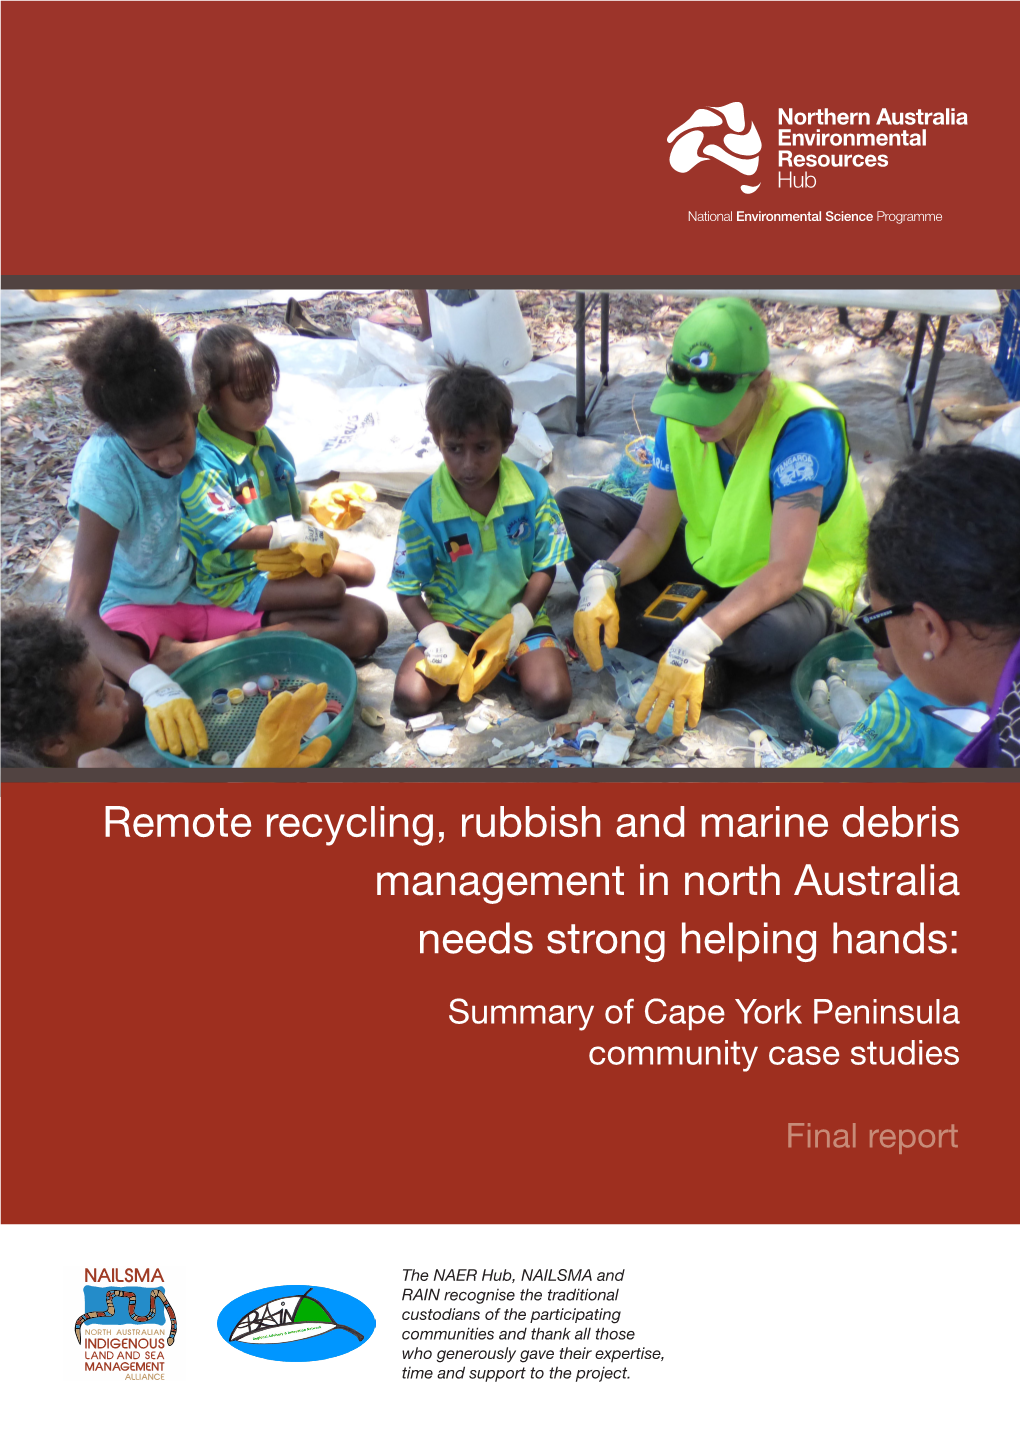 Remote Recycling, Rubbish and Marine Debris Management in North Australia Needs Strong Helping Hands: Summary of Cape York Peninsula Community Case Studies